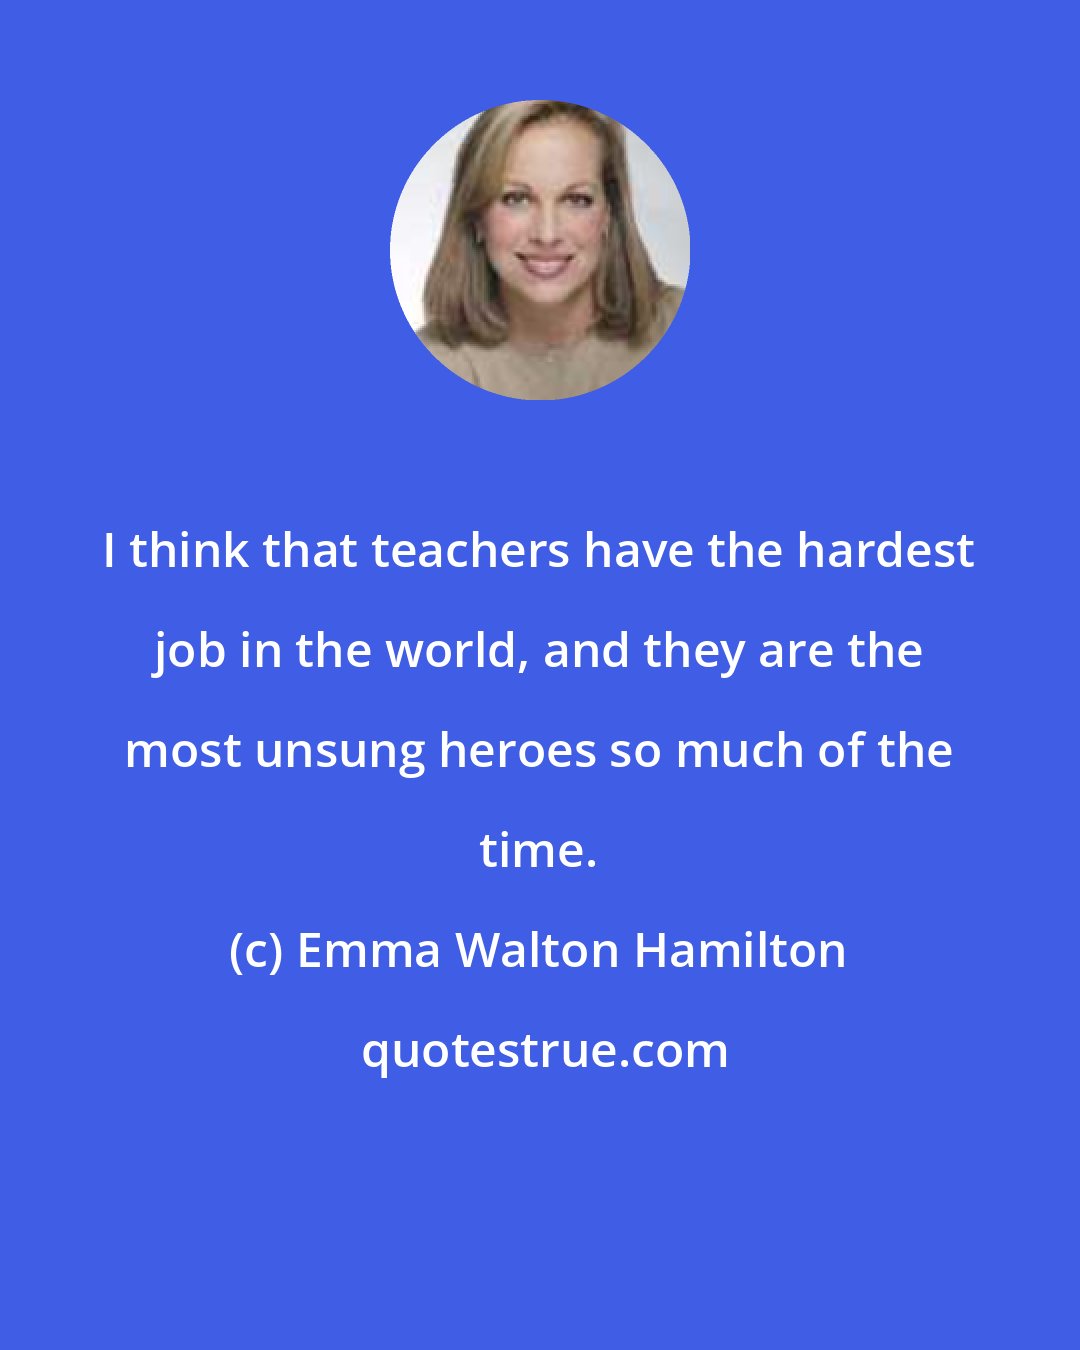 Emma Walton Hamilton: I think that teachers have the hardest job in the world, and they are the most unsung heroes so much of the time.